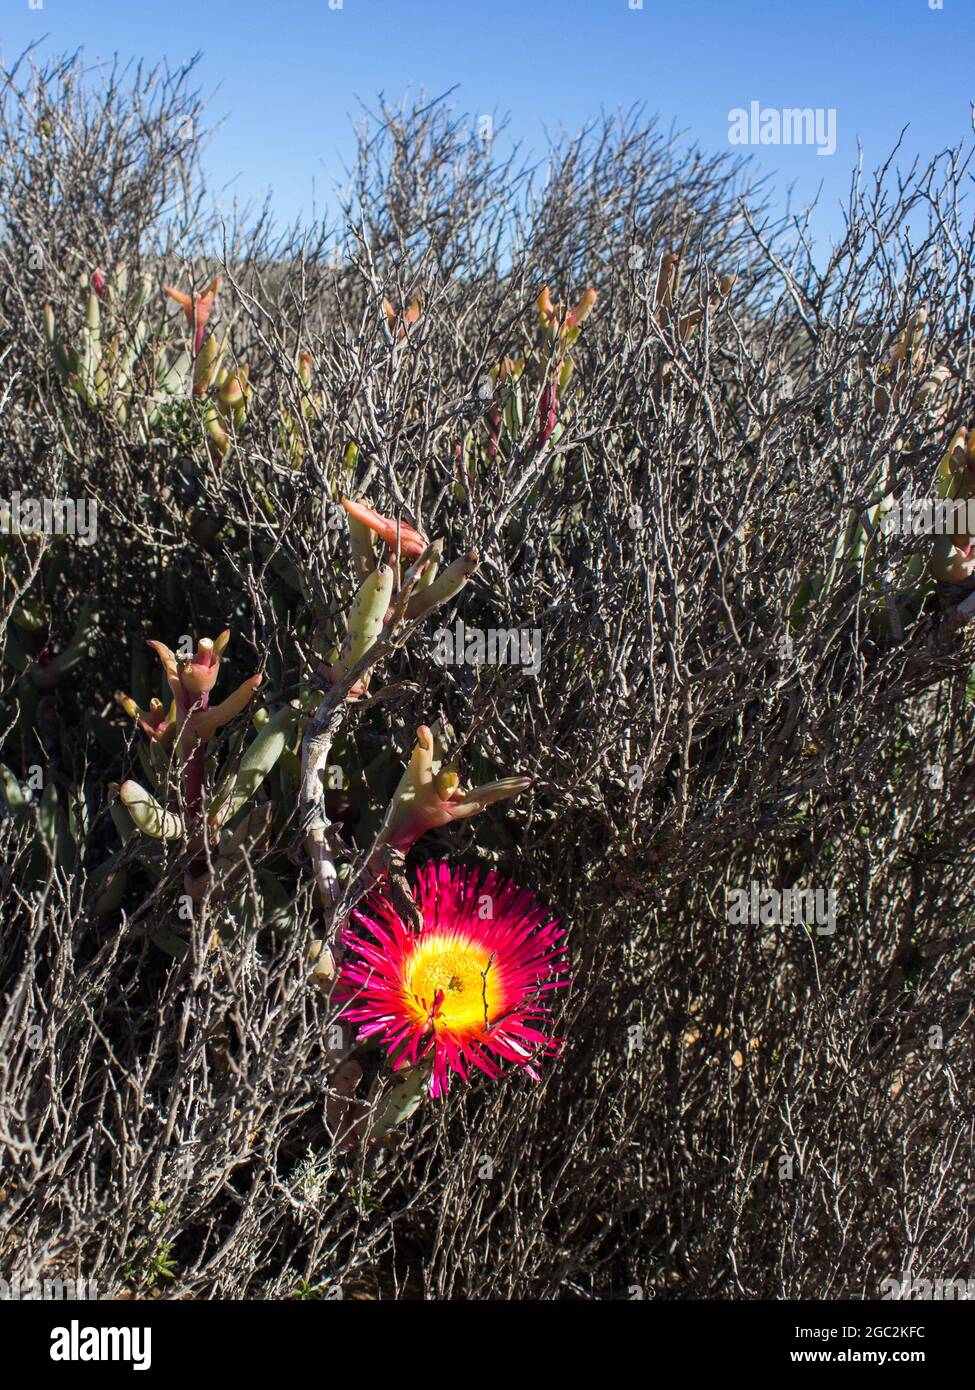 A Giant mat vygie, Cephalophyllum spongiosum, with a large bright pink flower, climbing up into a small dry bush in the strandveld of Namaqualand, SA Stock Photo